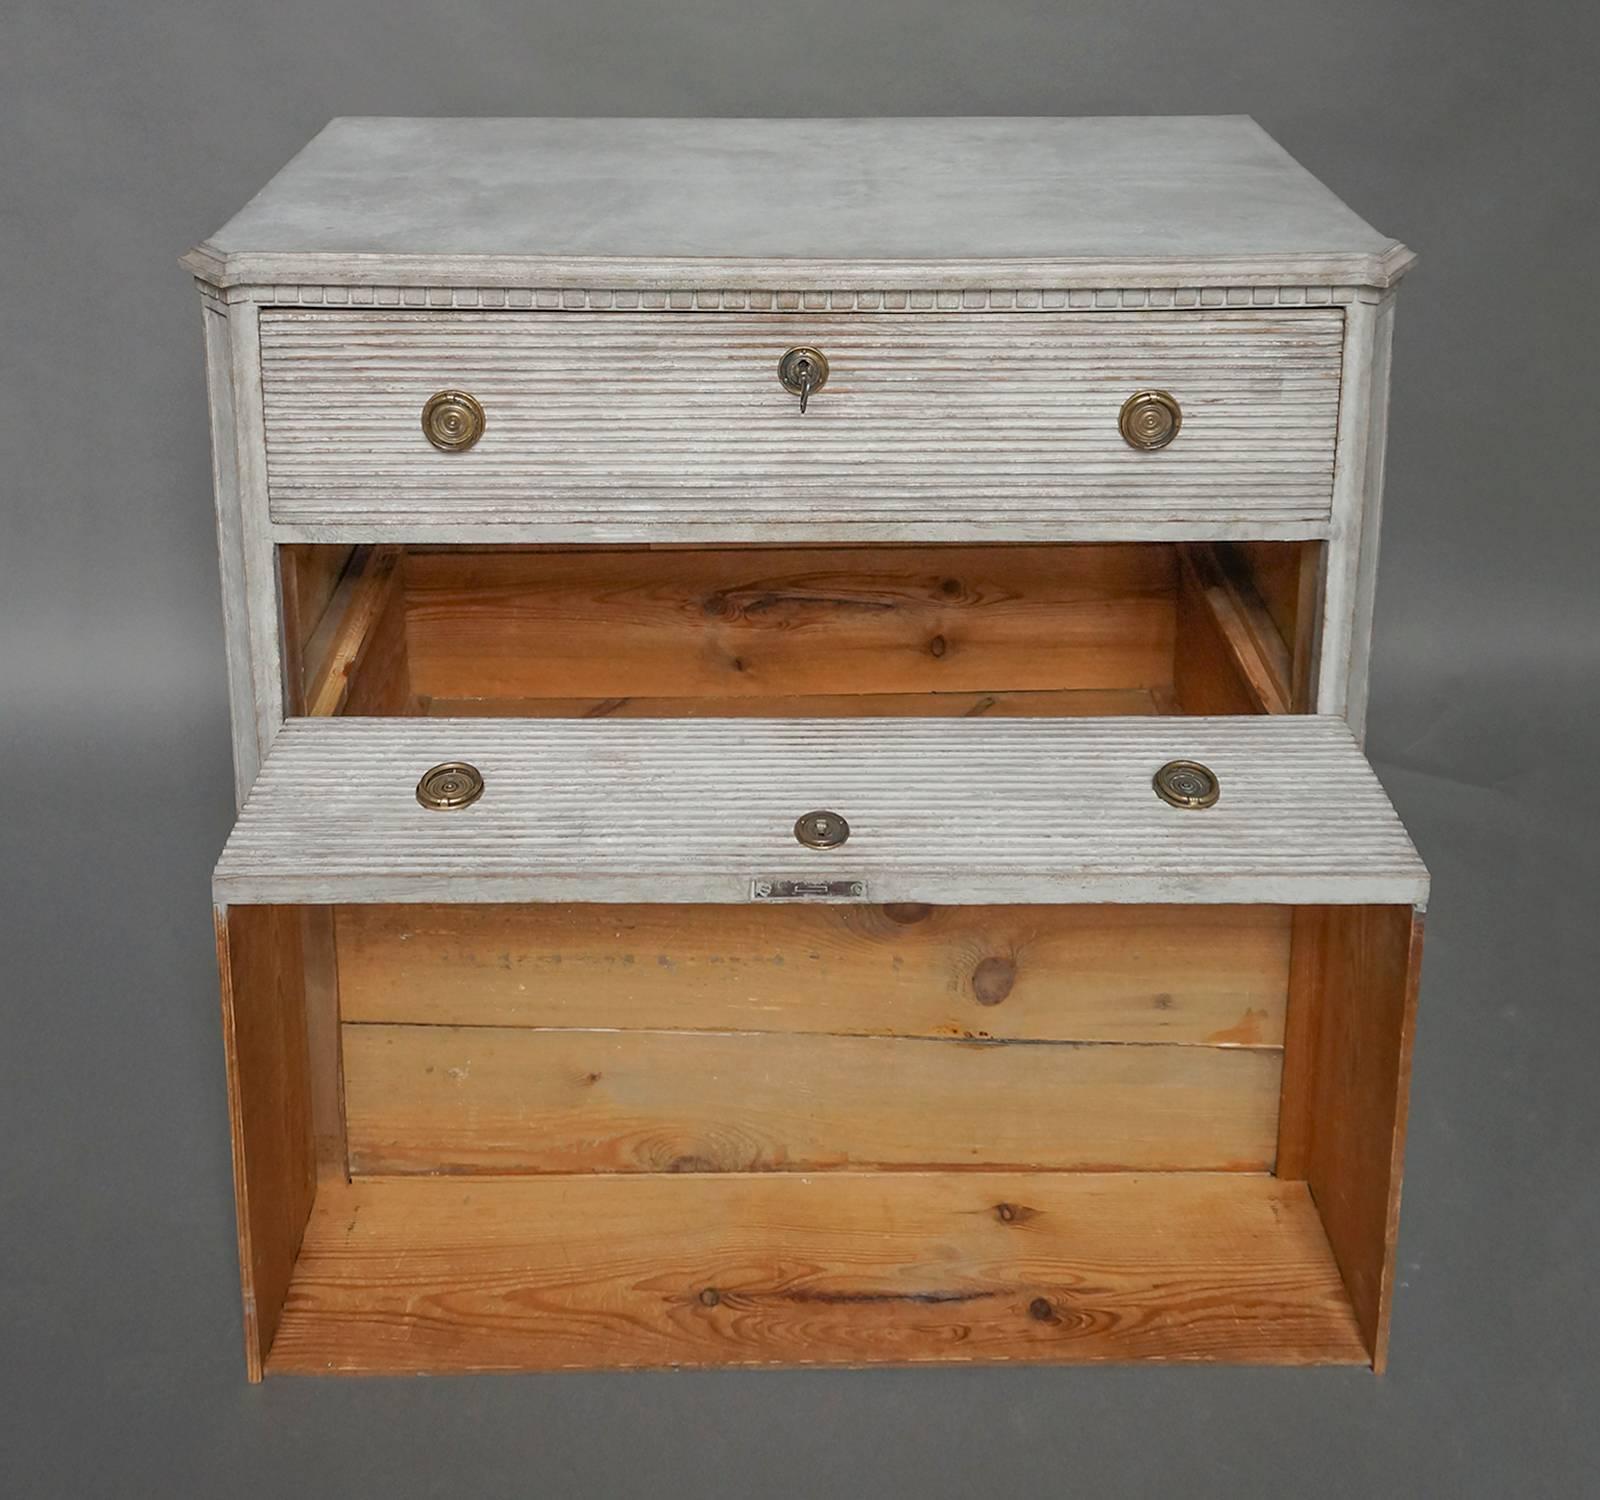 Swedish chest of drawers, circa 1850 in the Gustavian style. The three drawers have full-width horizontal reeding, and the canted corner posts feature recessed panels. Shaped top and tapering square feet.